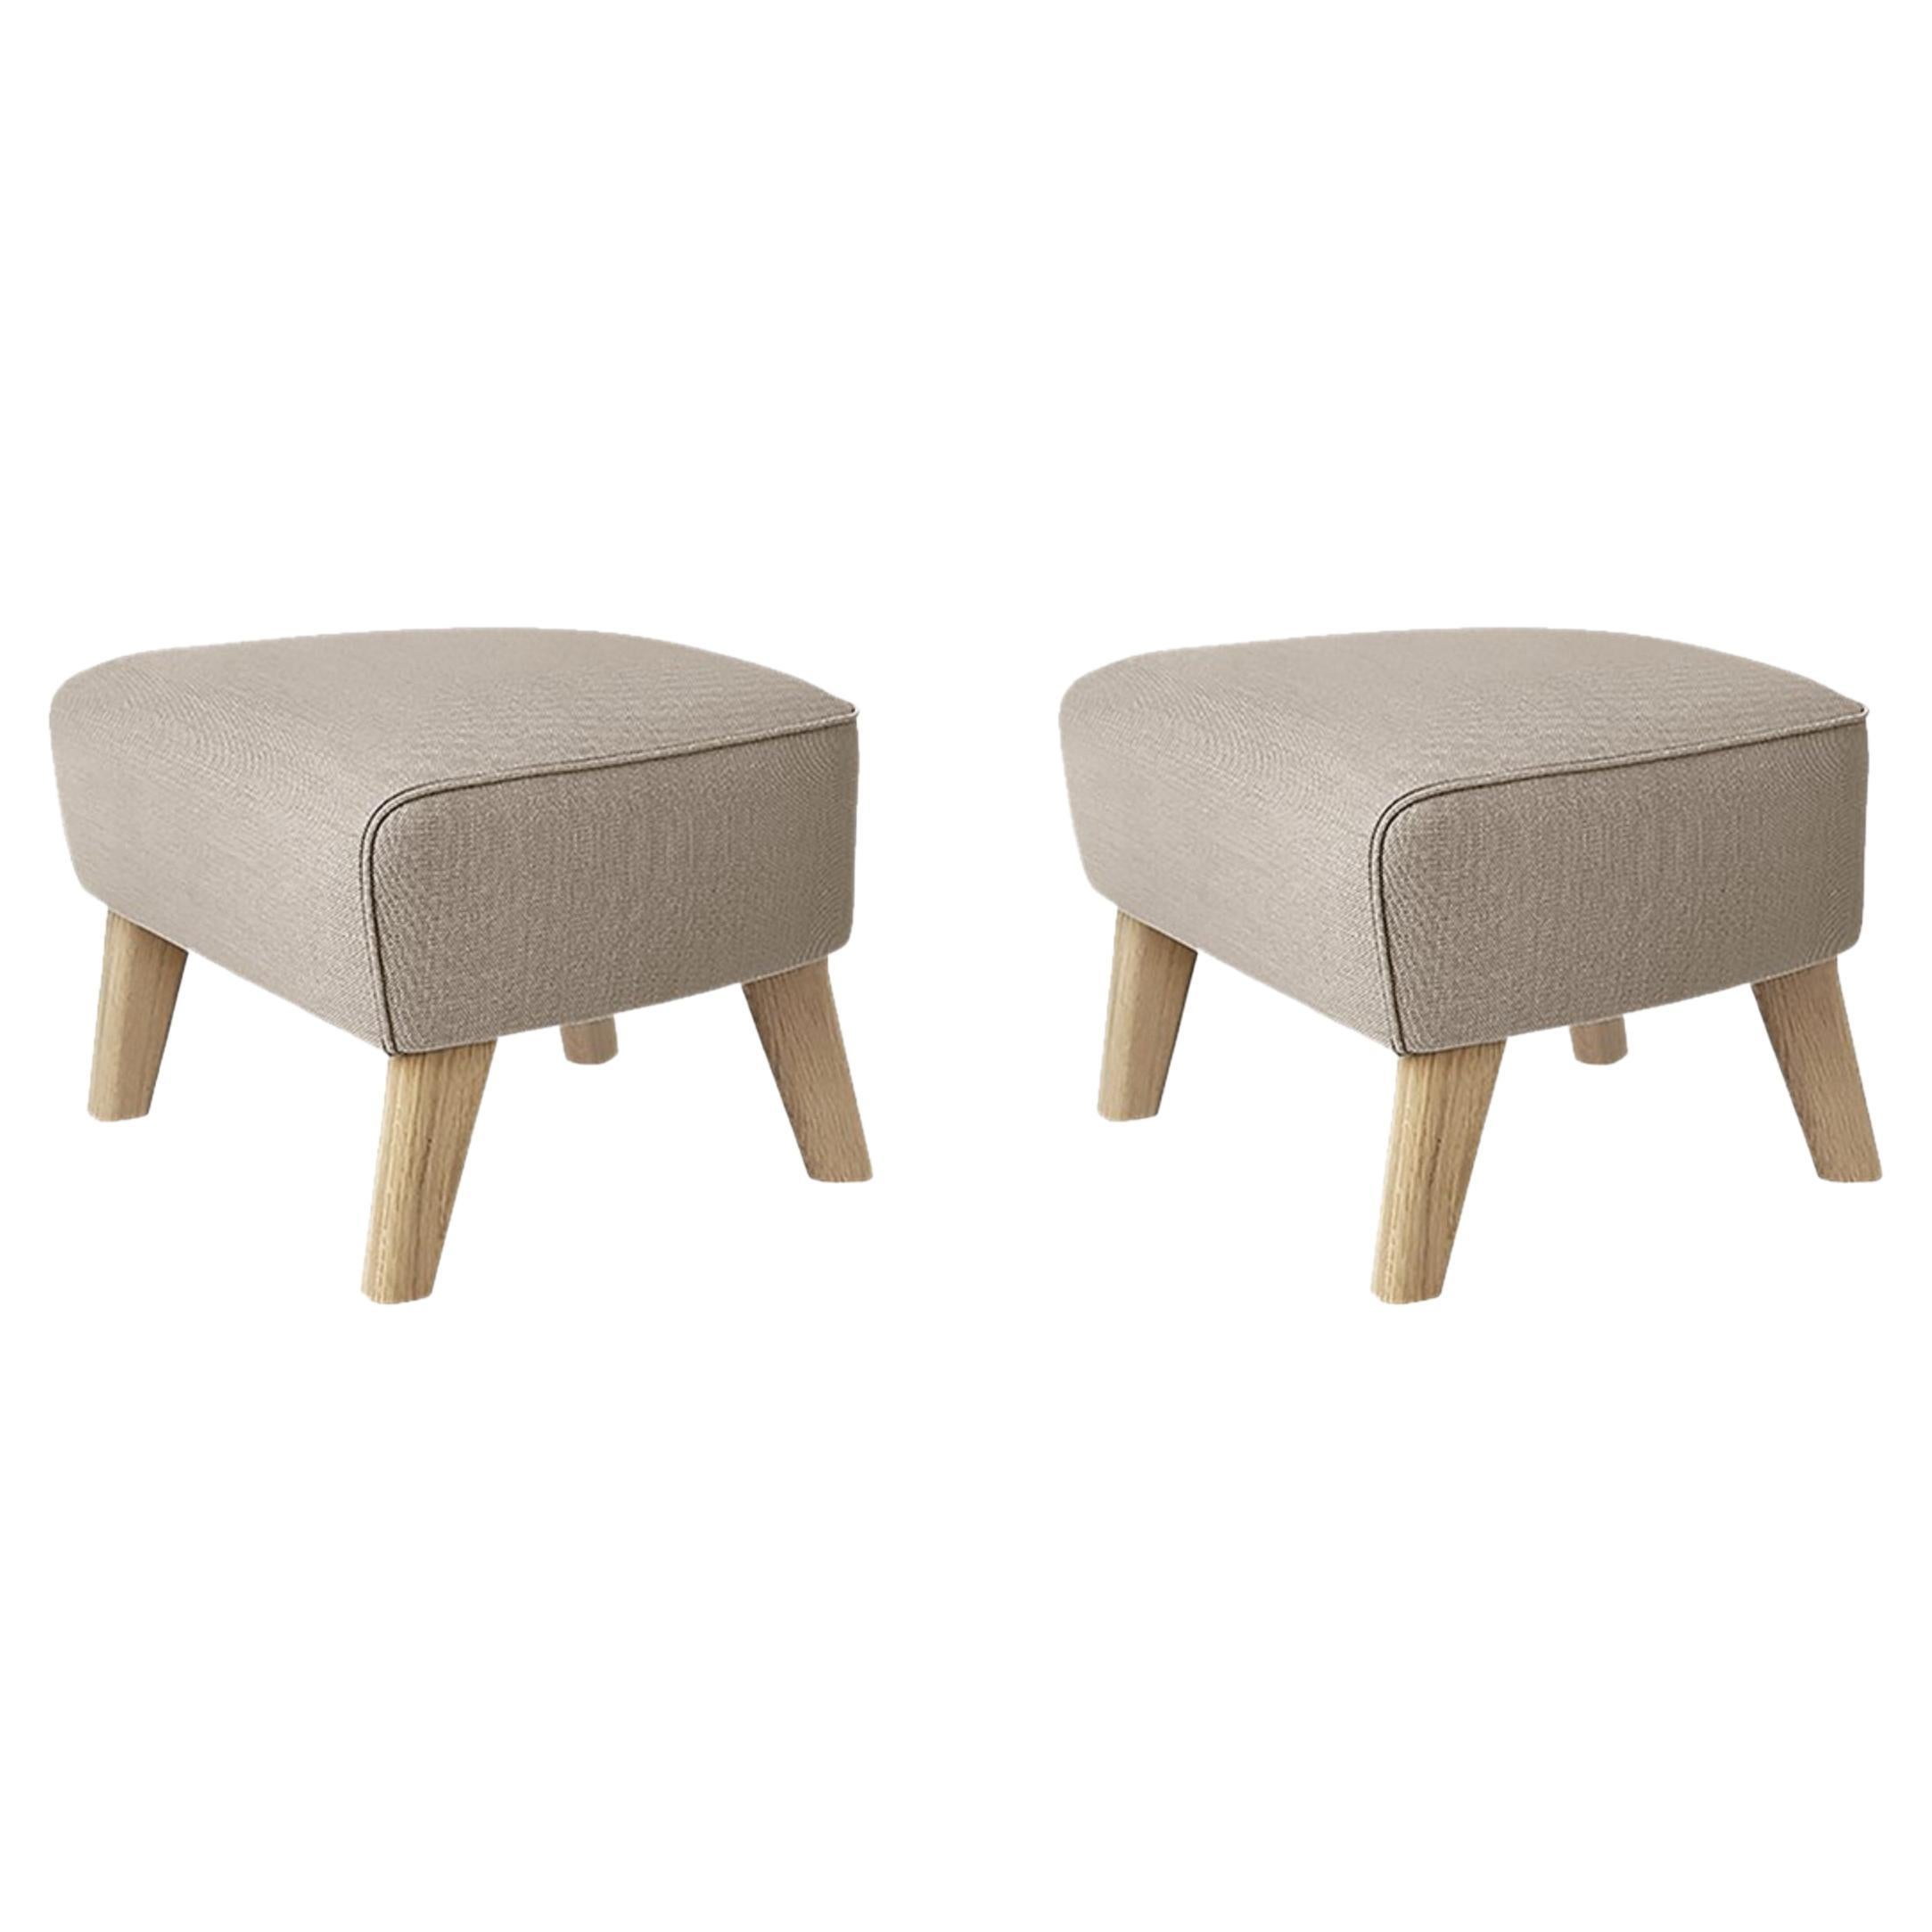 Set of 2 Beige and Natural Oak Sahco Zero Footstool by Lassen For Sale